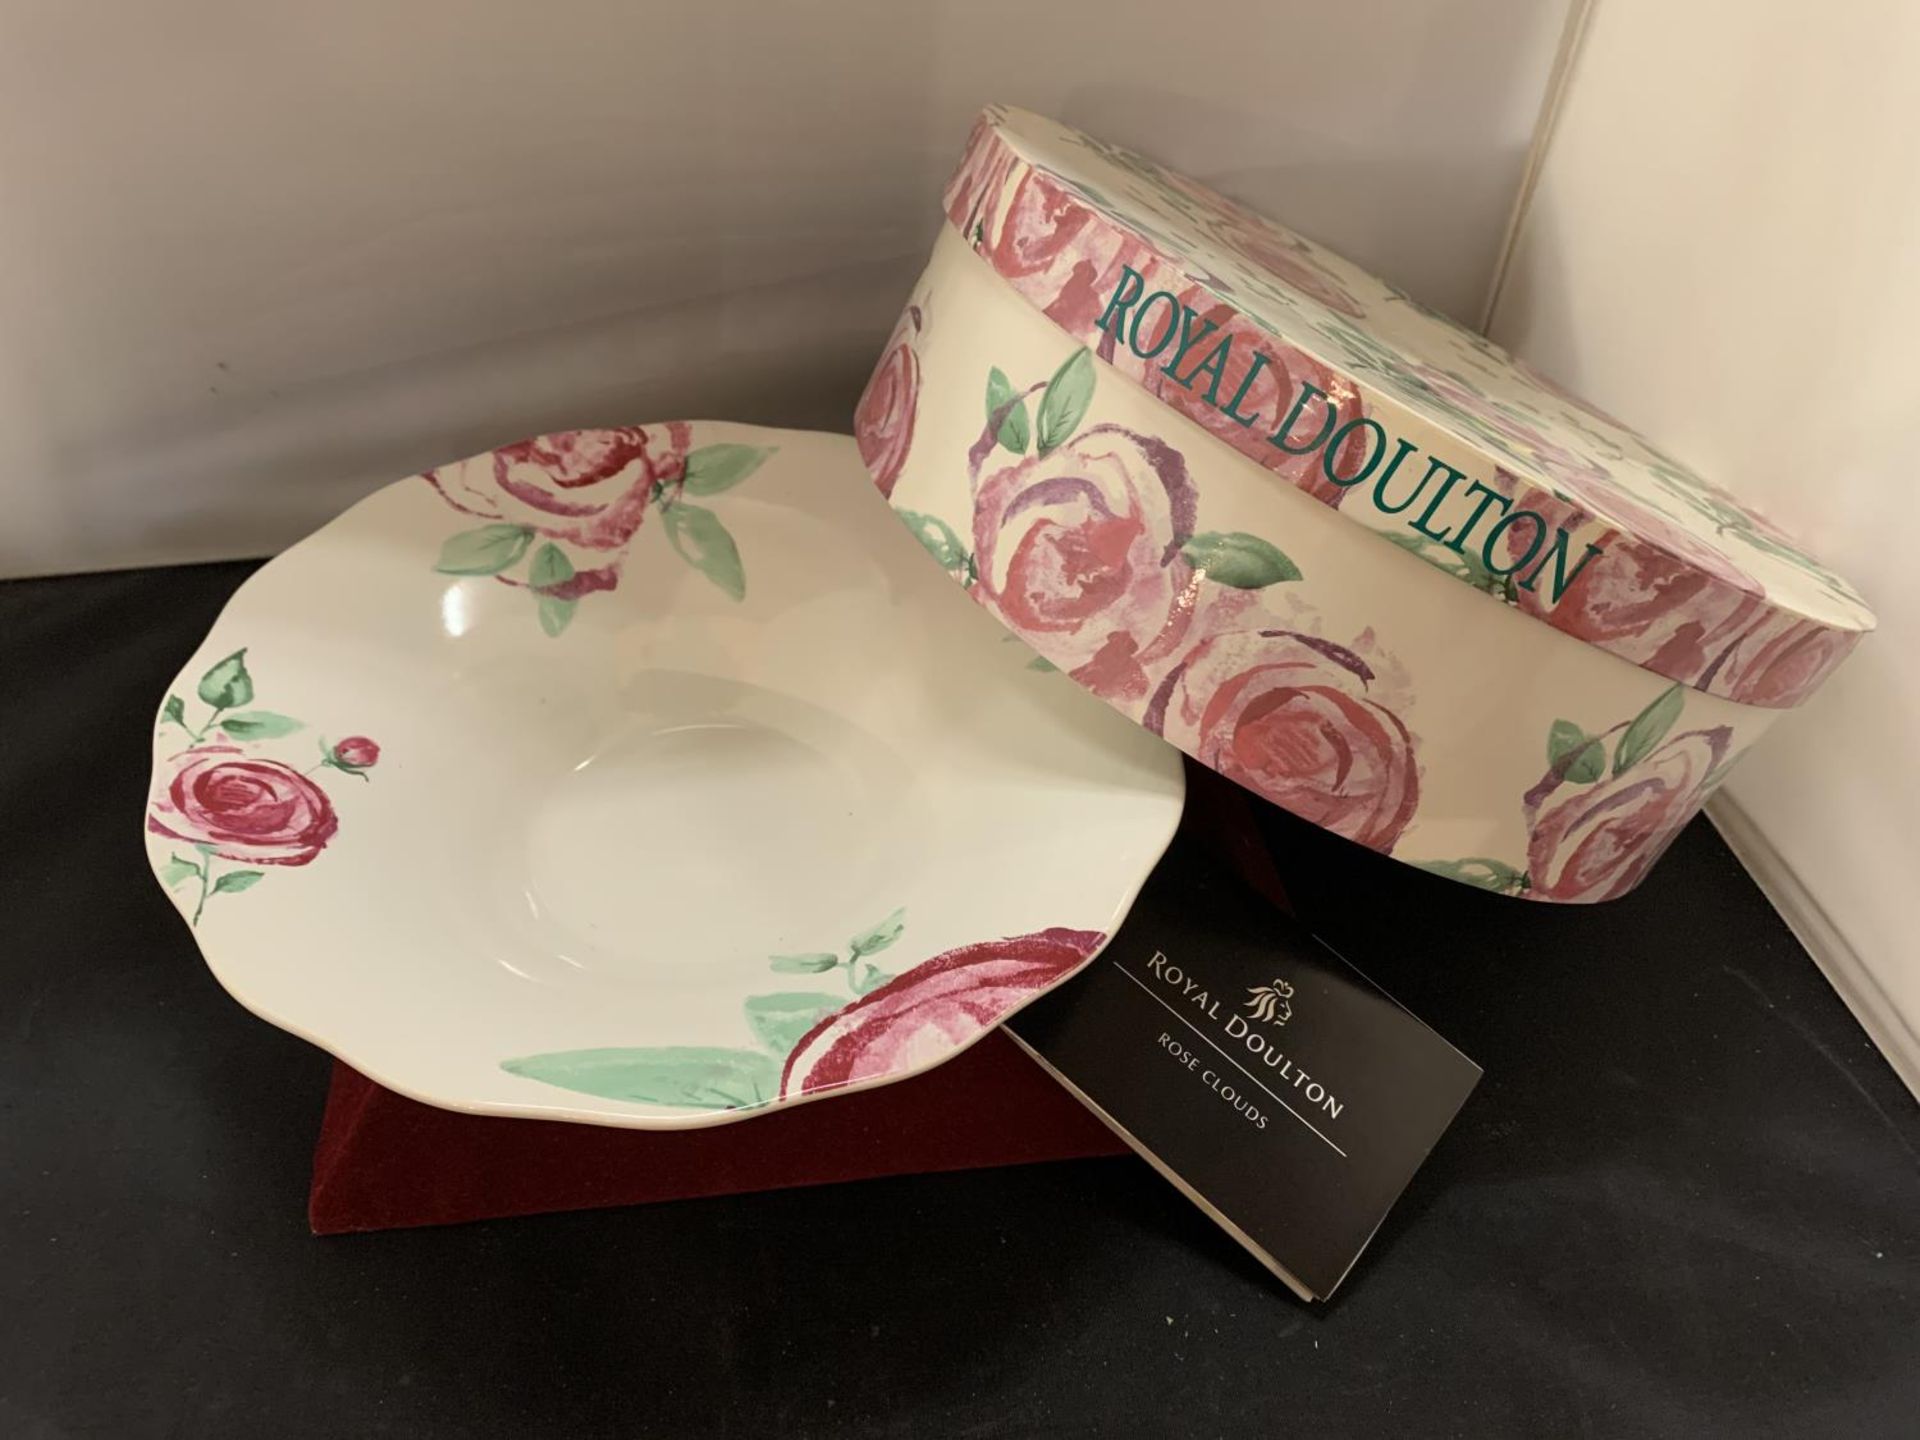 A ROYAL DOULTON ROSE CLOUDS LOW BOWL IN A PRESENTATION BOX - Image 2 of 6